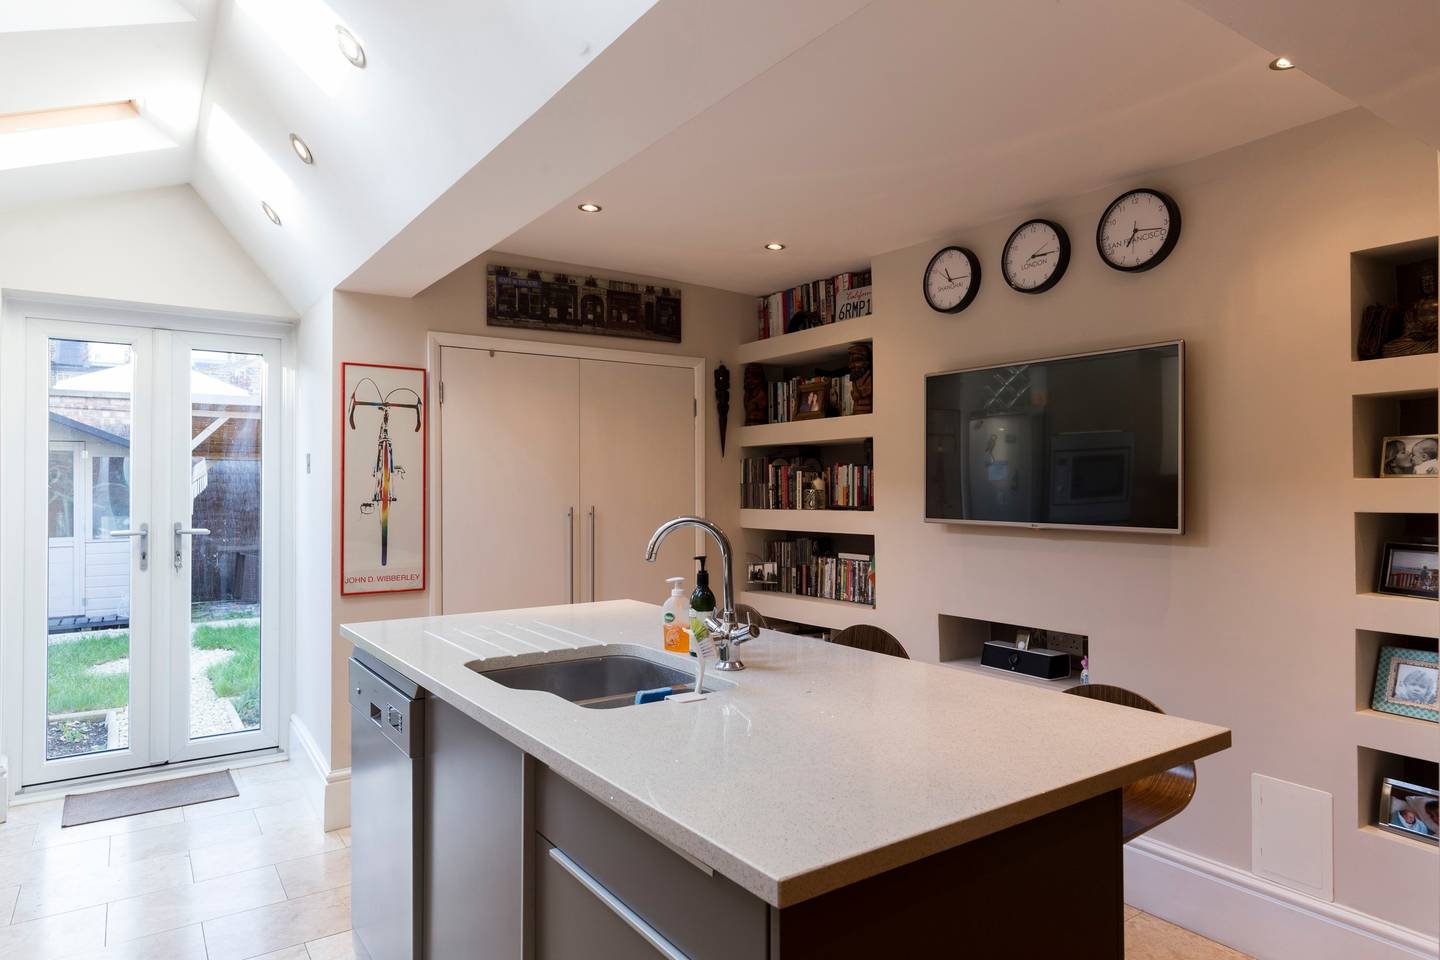 Property Image 2 - Exclusive Upscale Edwardian Home in Colliers Wood